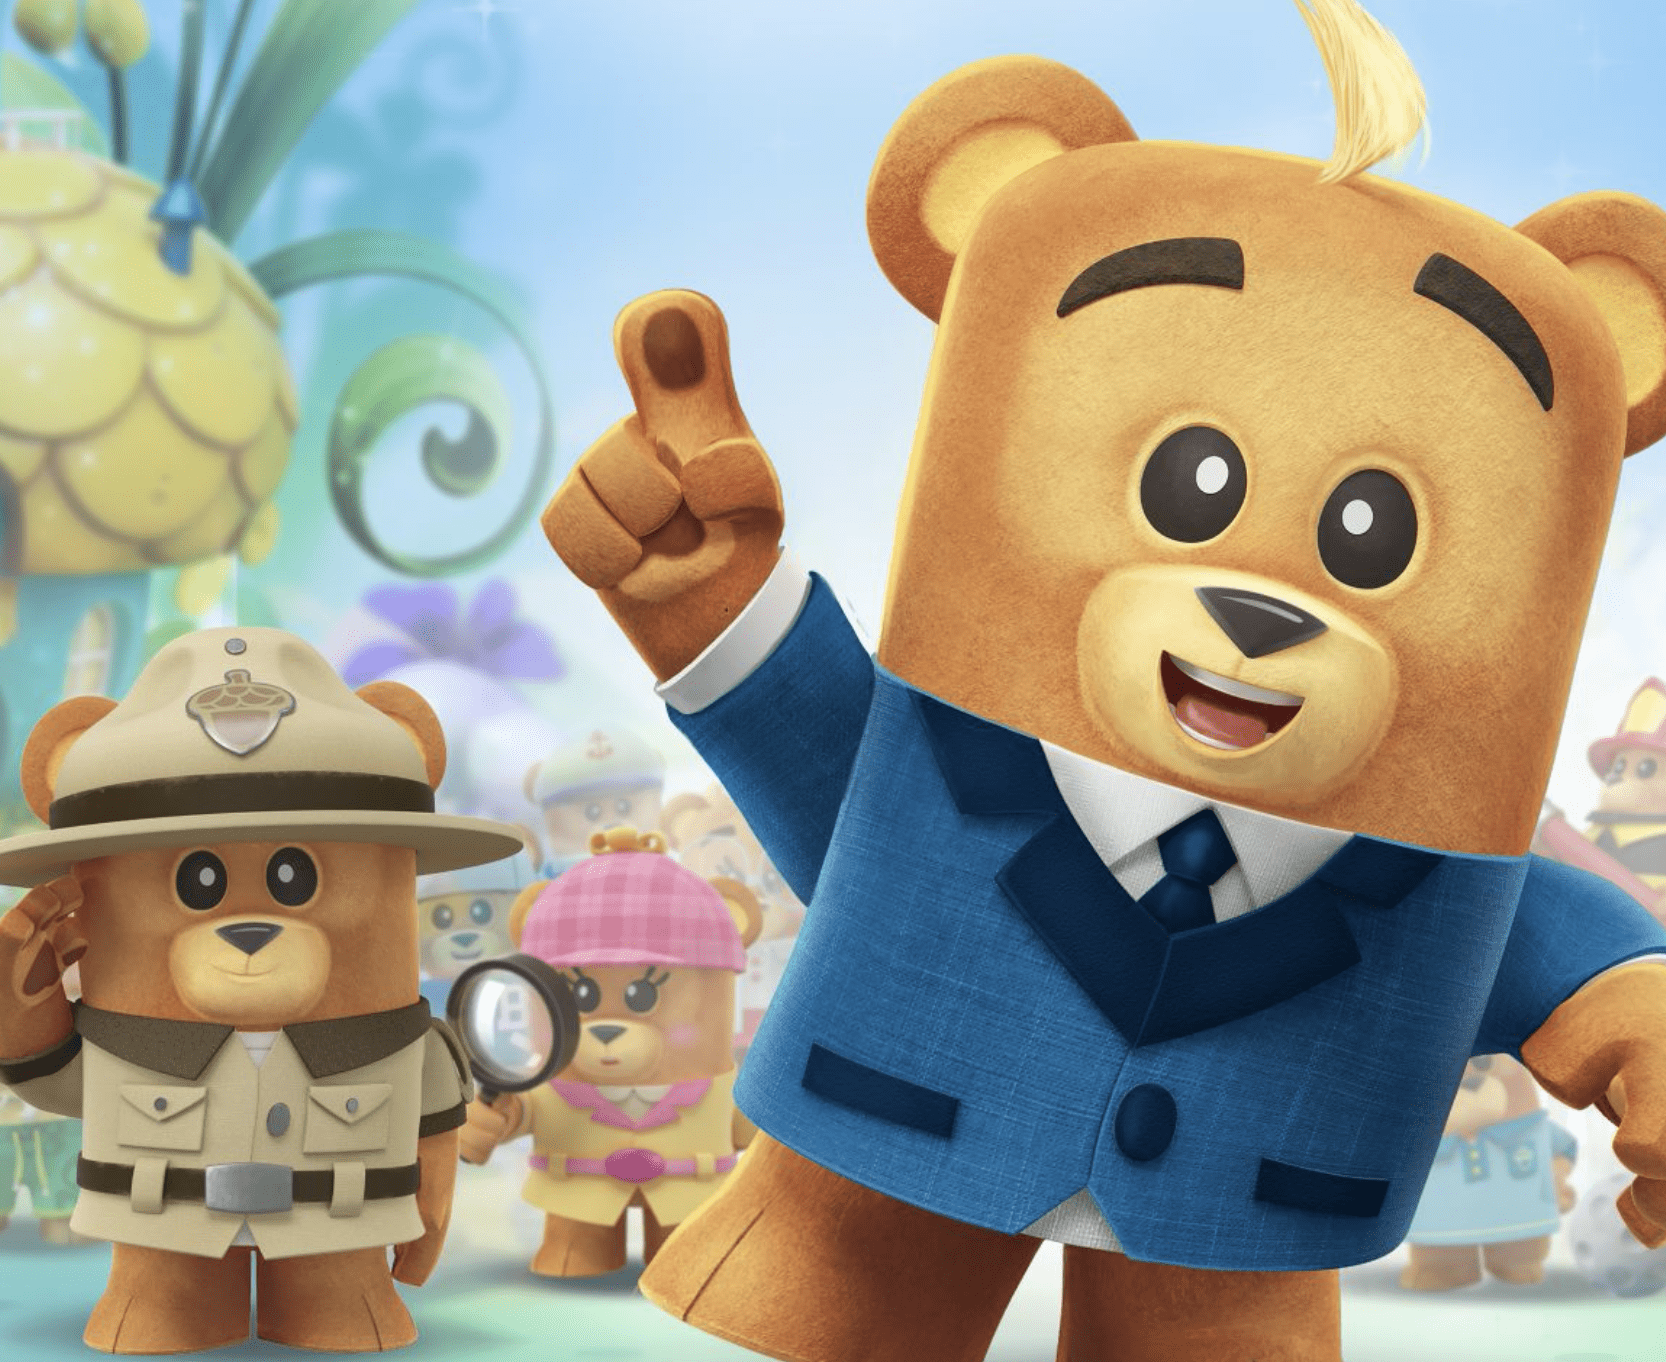 Toonz Animation and Gummybear International Sign Content Deal For